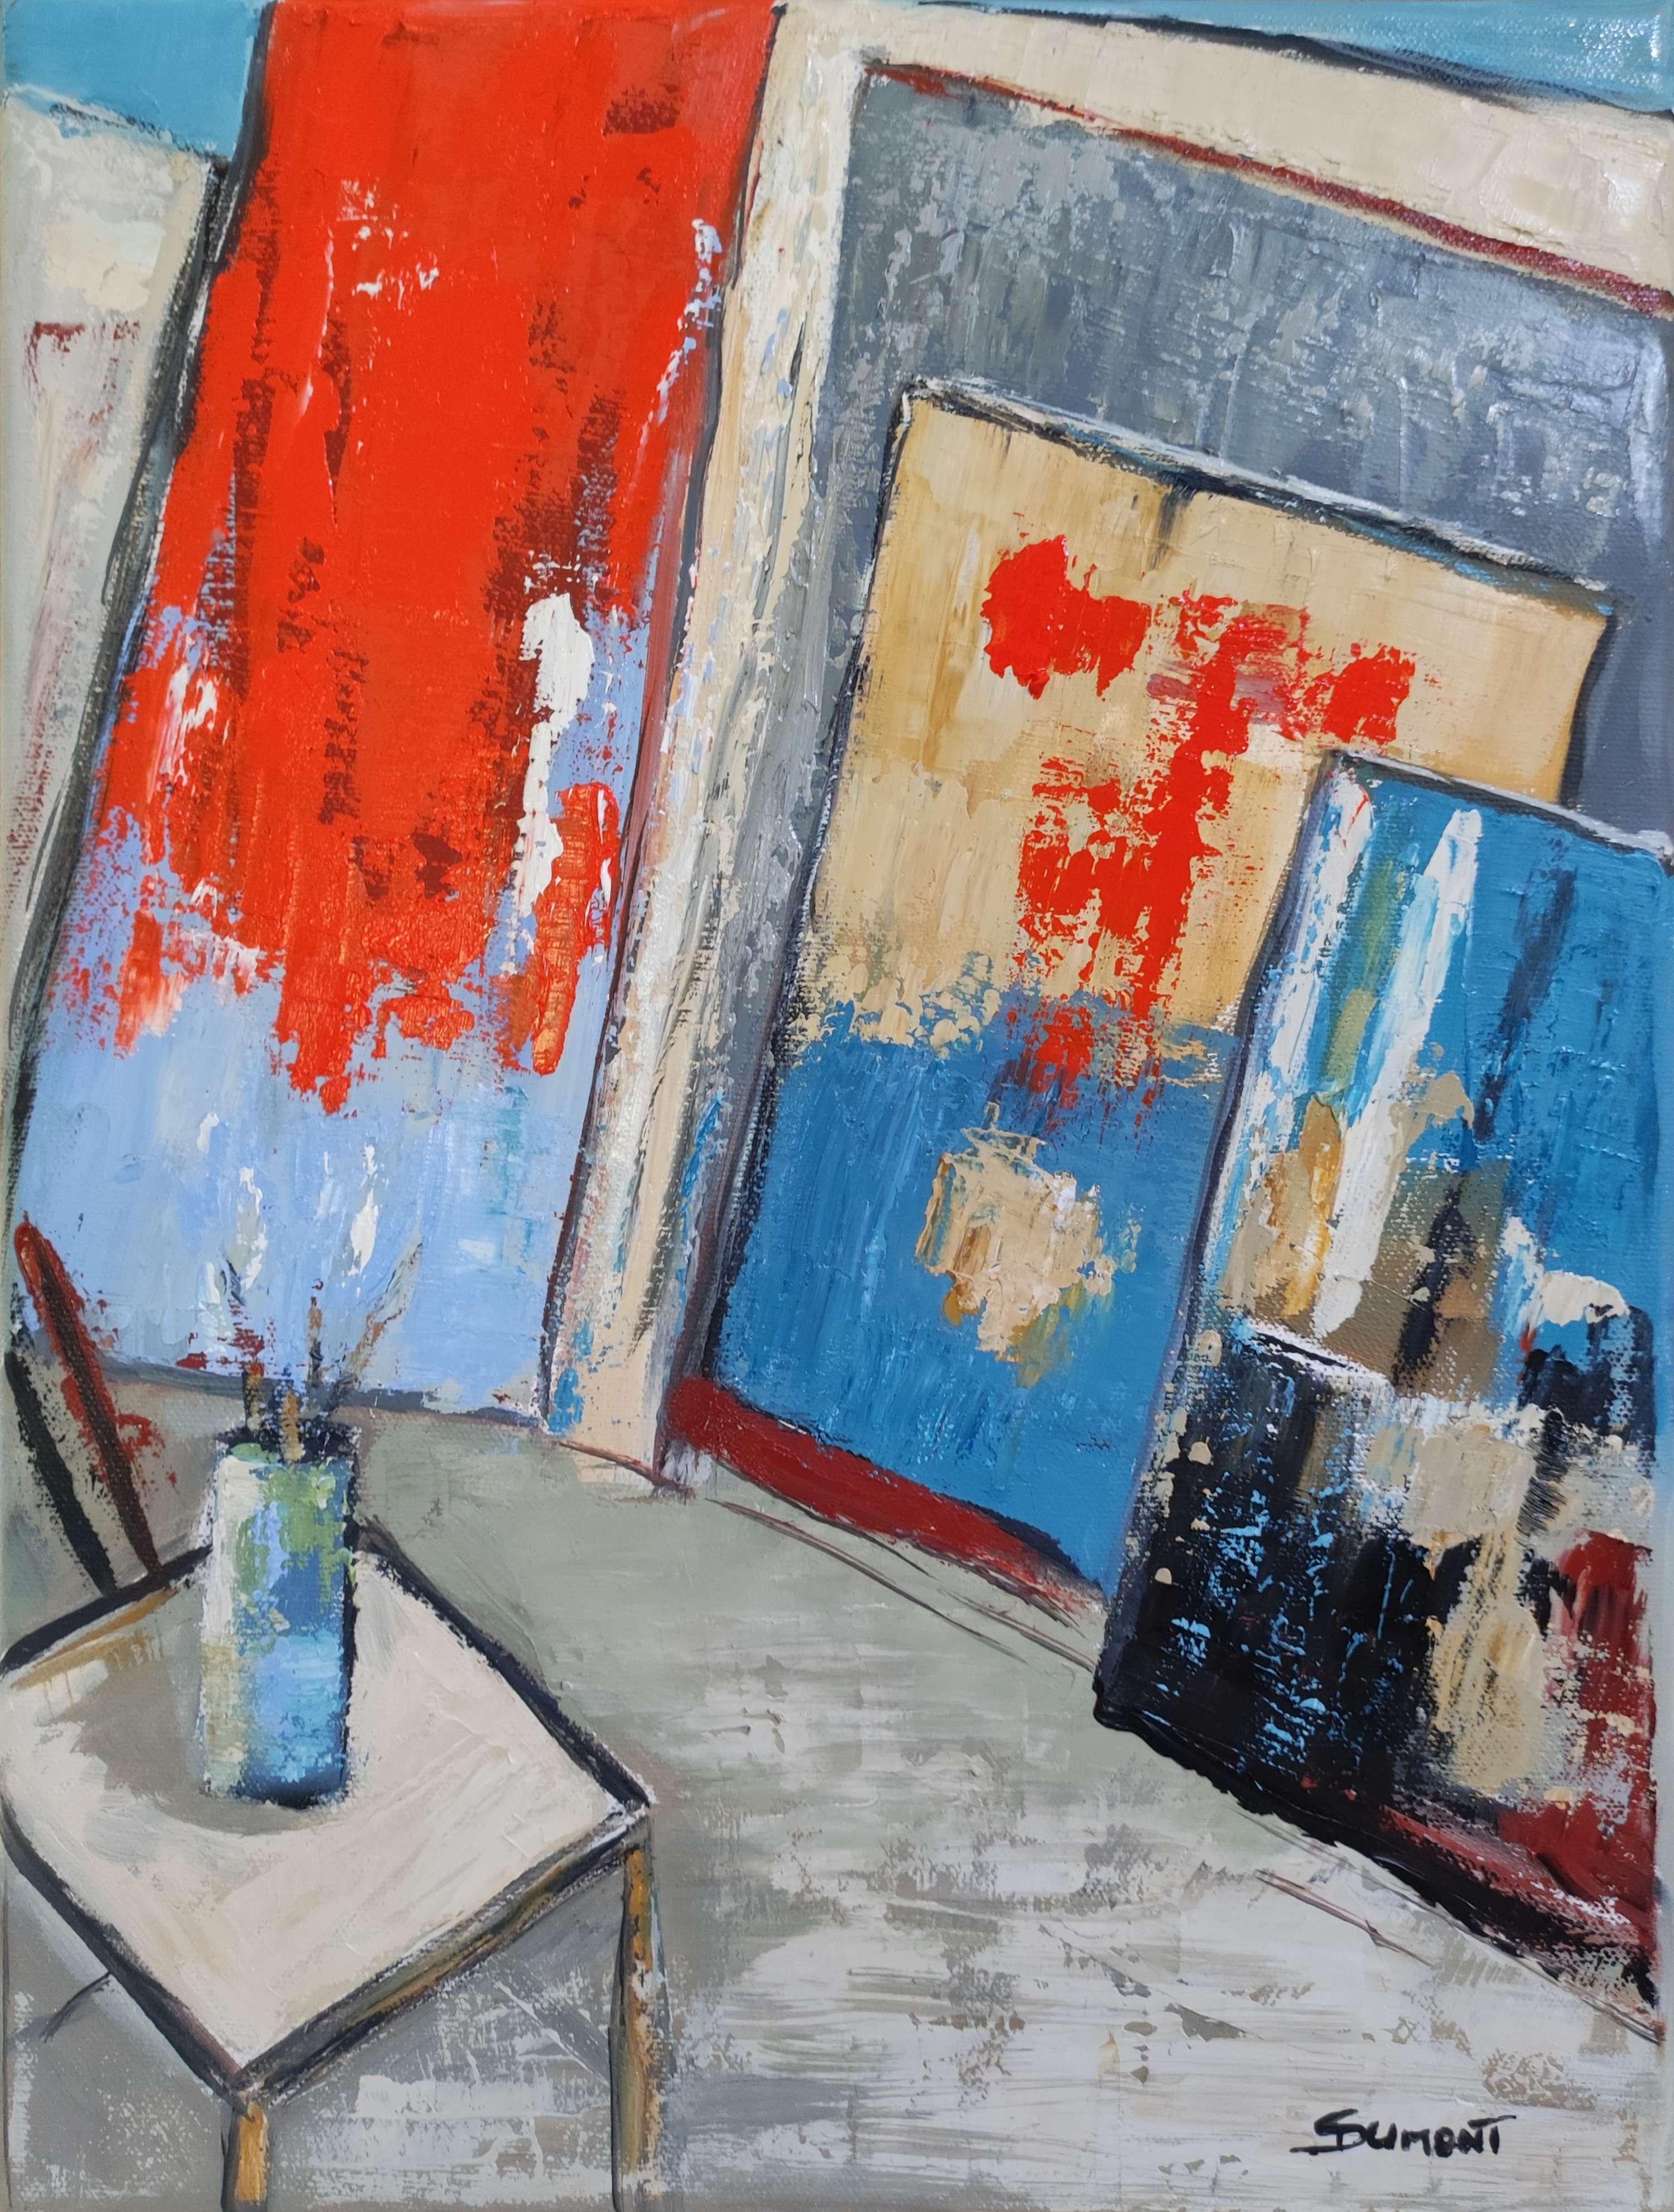 My studio, red abstract; expressionism, geometric, texture, oil on linen canvas - Painting by SOPHIE DUMONT